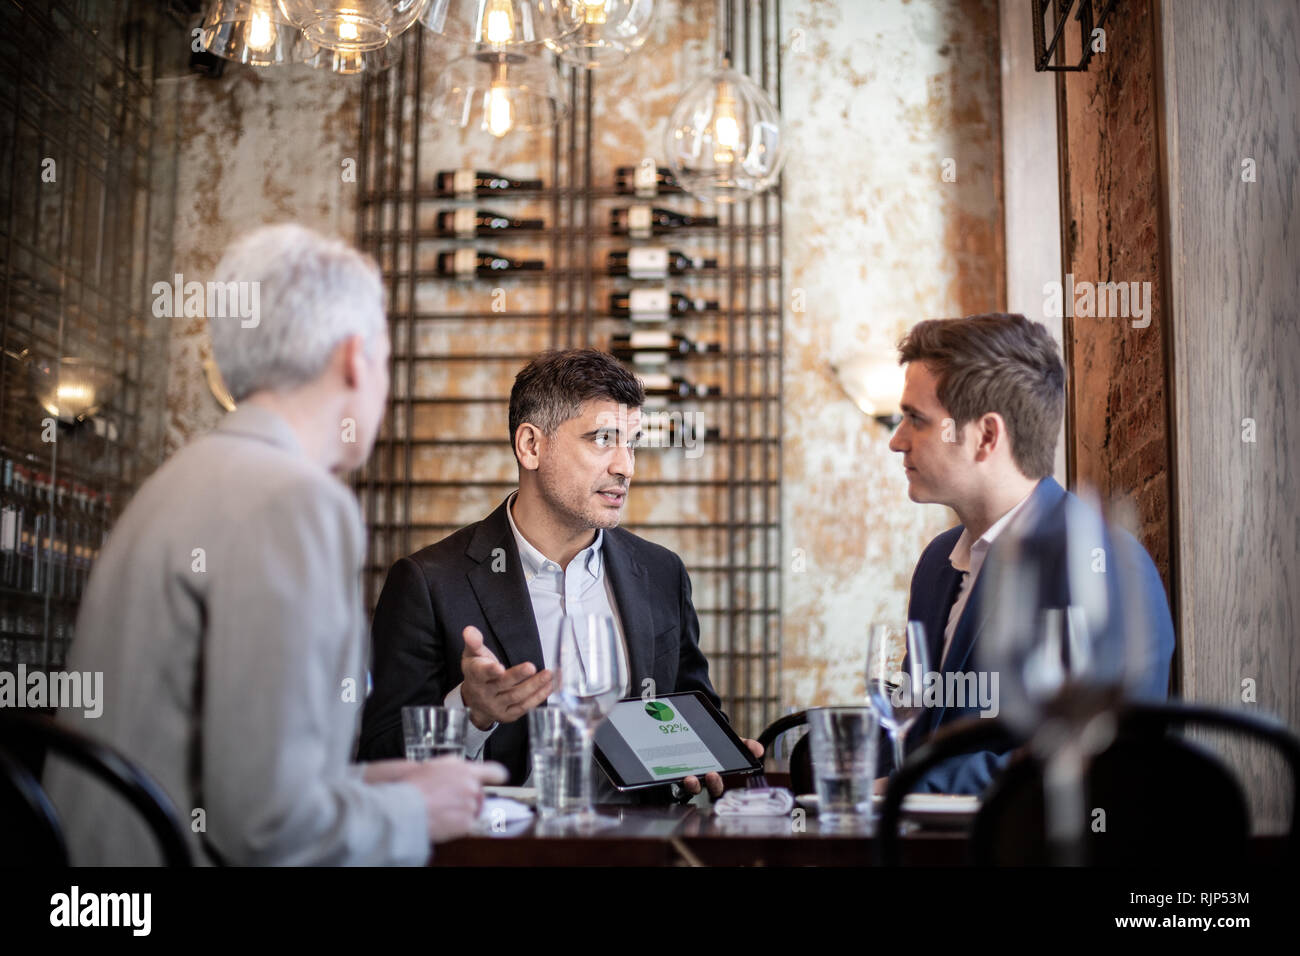 Business executives having a working lunch in a restaurant Stock Photo